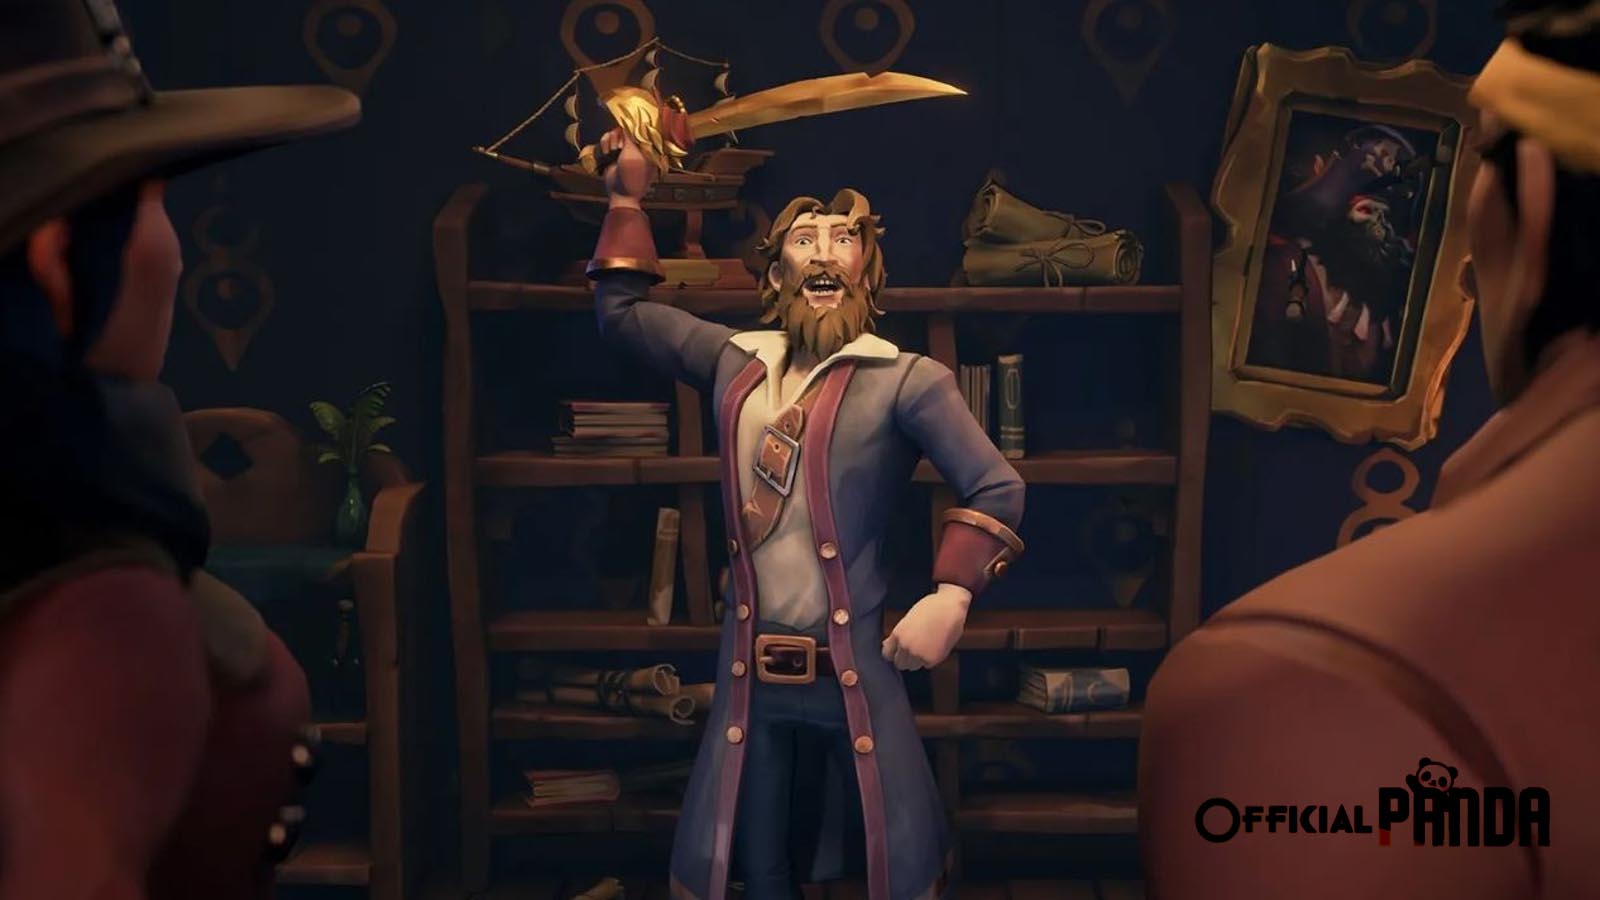 Sea of Thieves Monkey Island Part 2 and 3